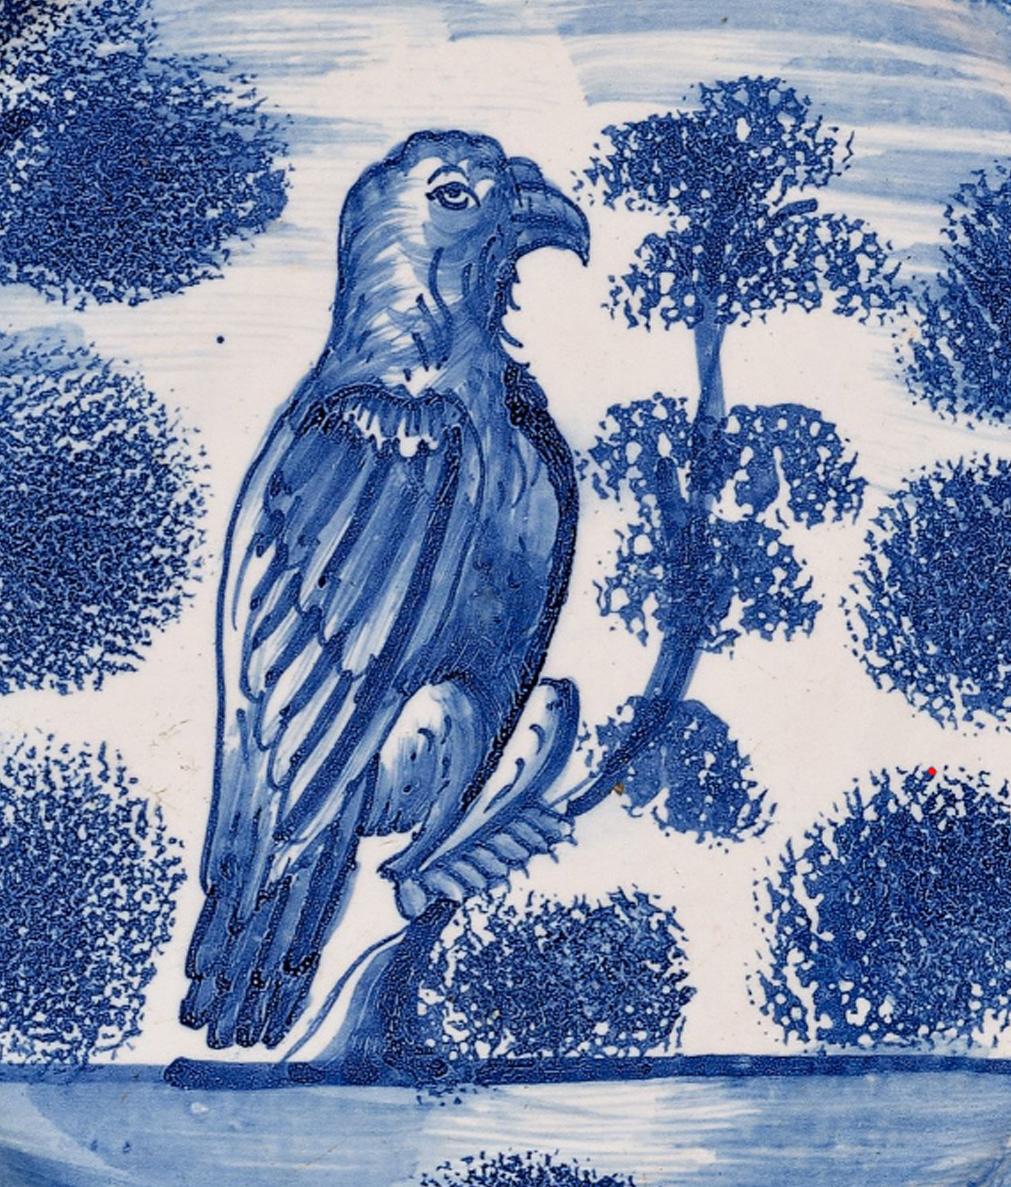 English Delftware Plate with Hawk Perched on Tree, London, Probably Vauxhall, Circa 1710-25